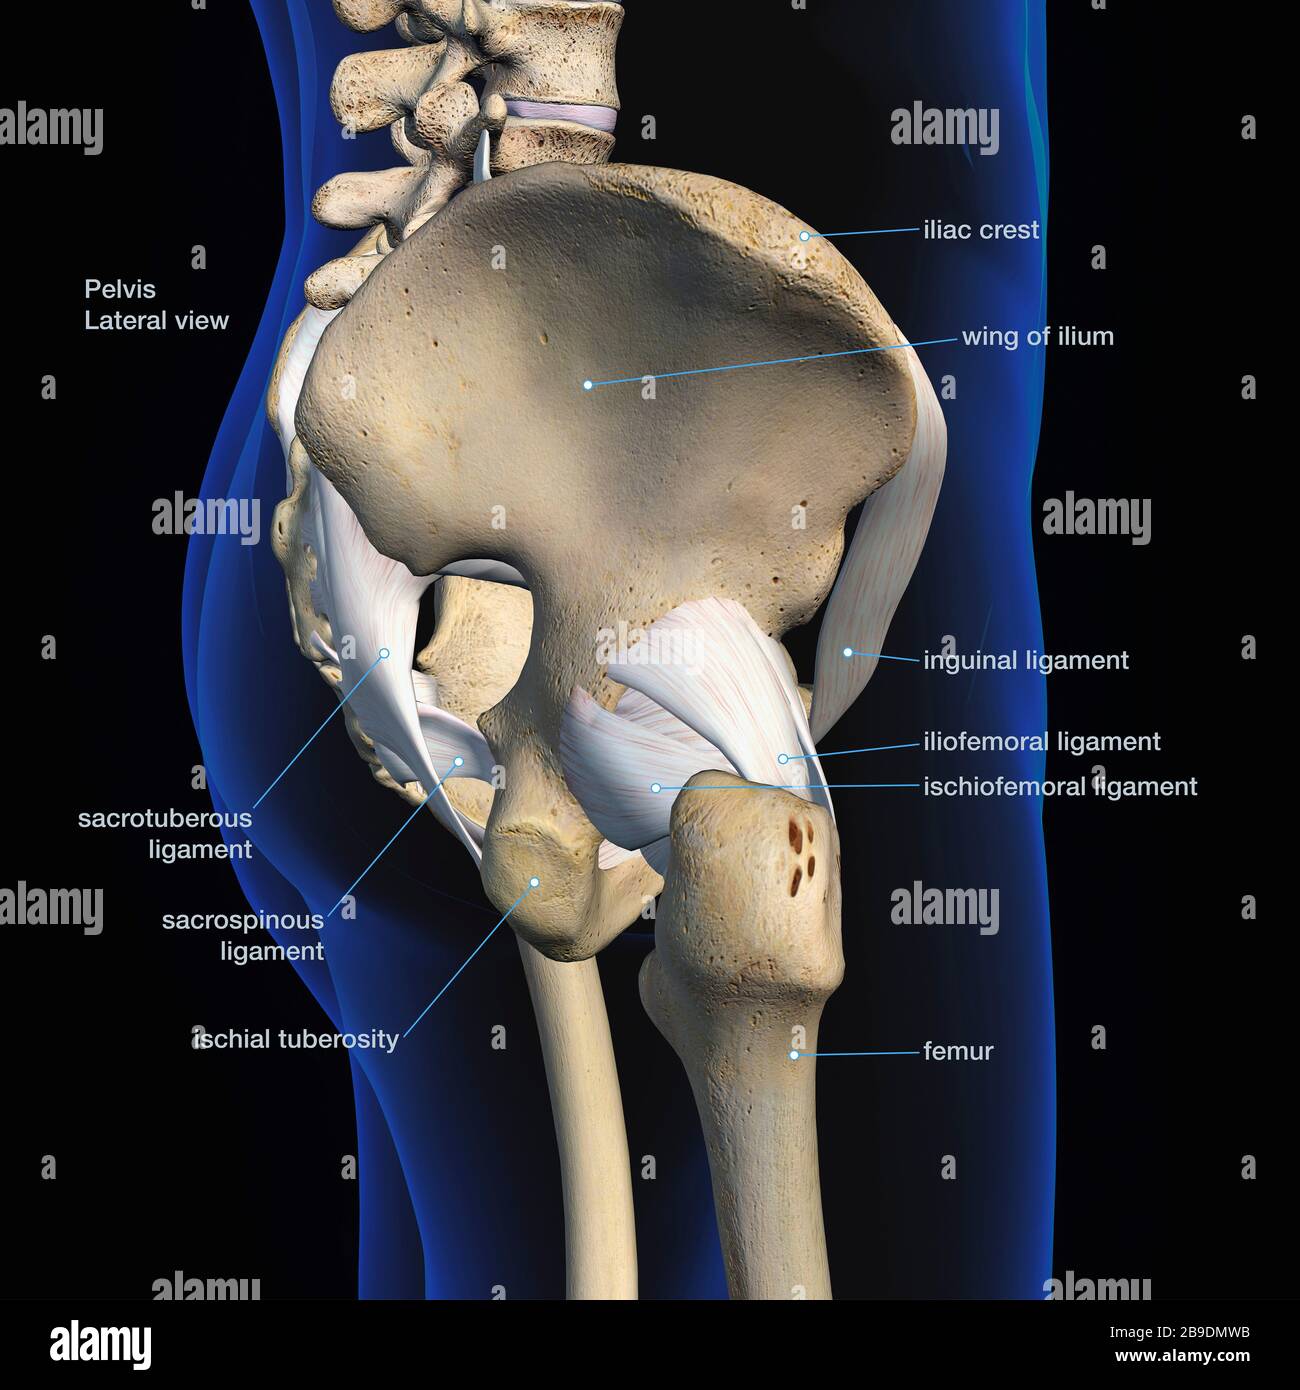 Lateral view of male pelvis, hip, leg bones and ligaments on black background. Stock Photo